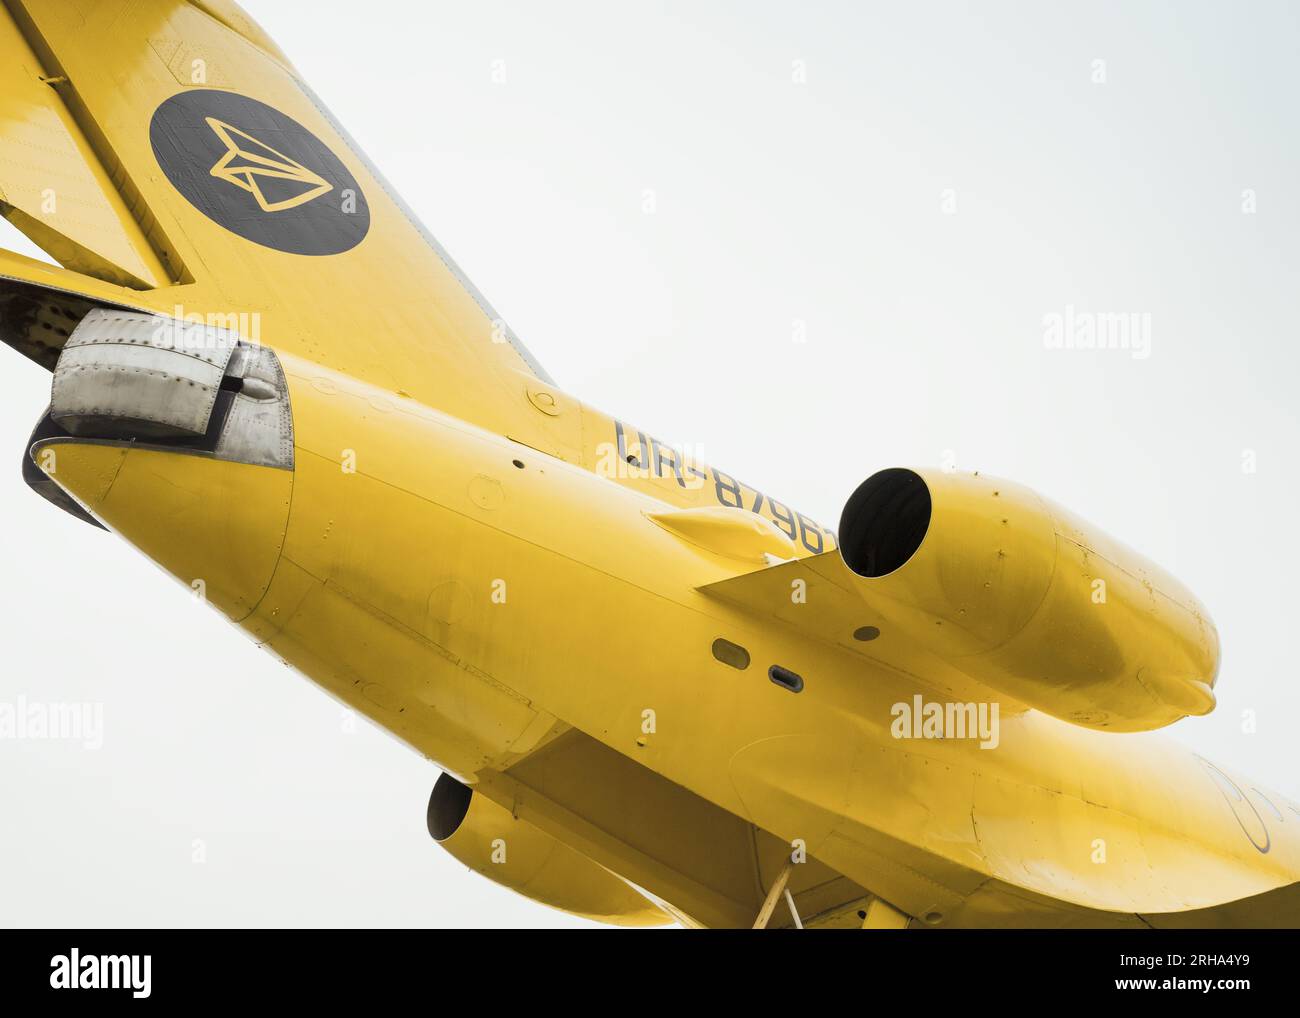 empennage of soviet trijet plane Yak-40. Tail section of yellow regional jet - view from below. Stock Photo